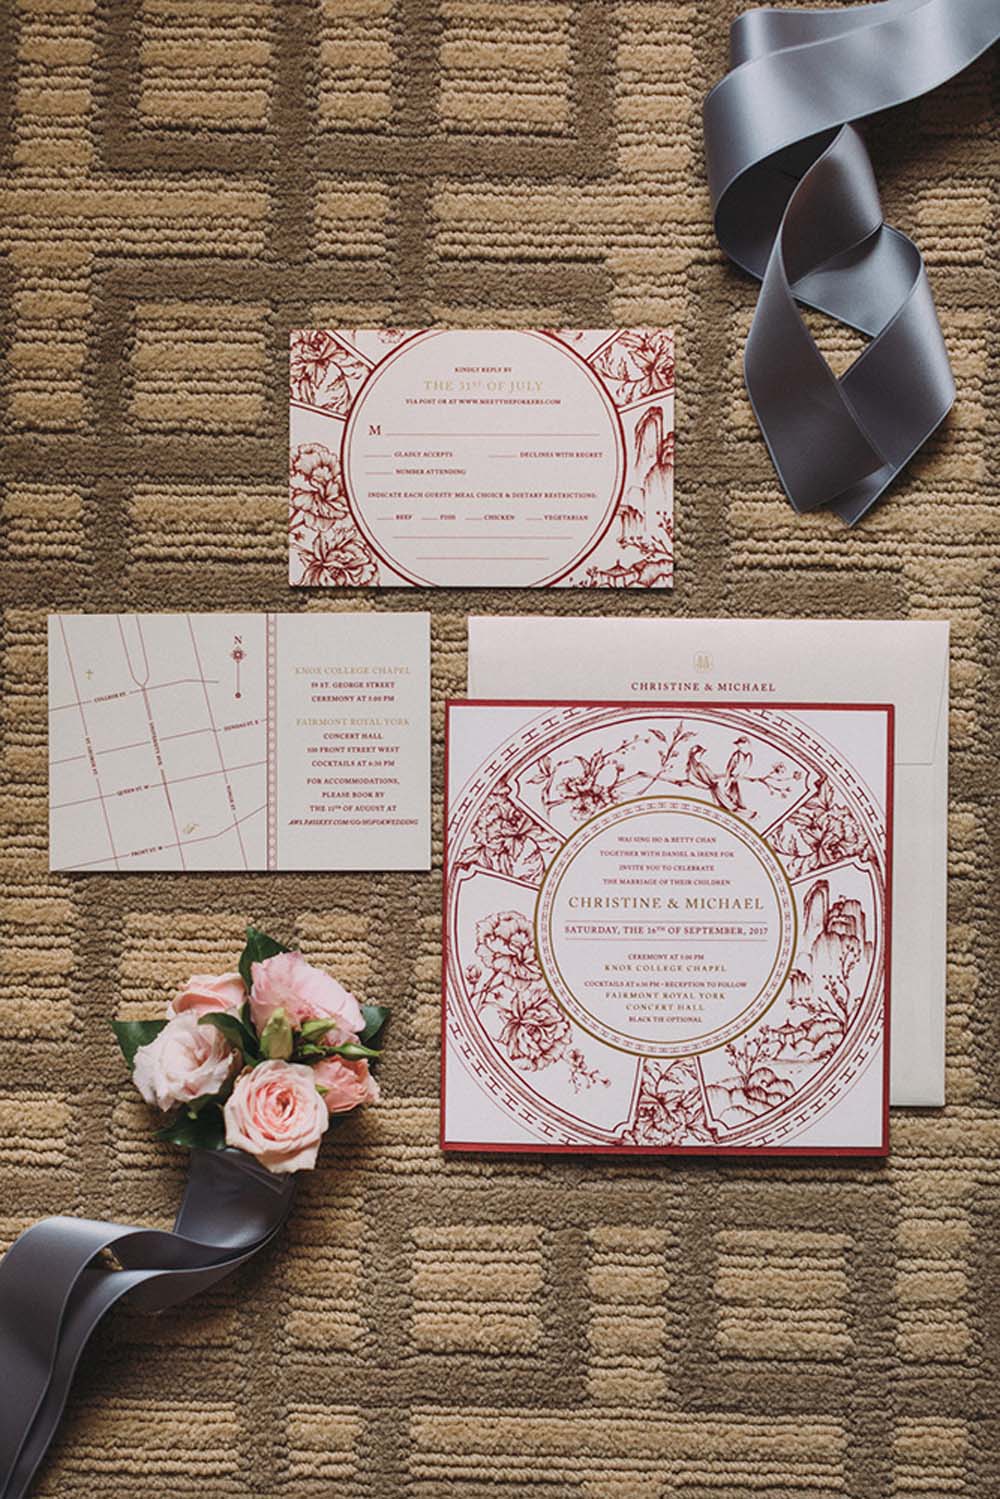 An Elegant Wedding with Cultural Elements - Stationery